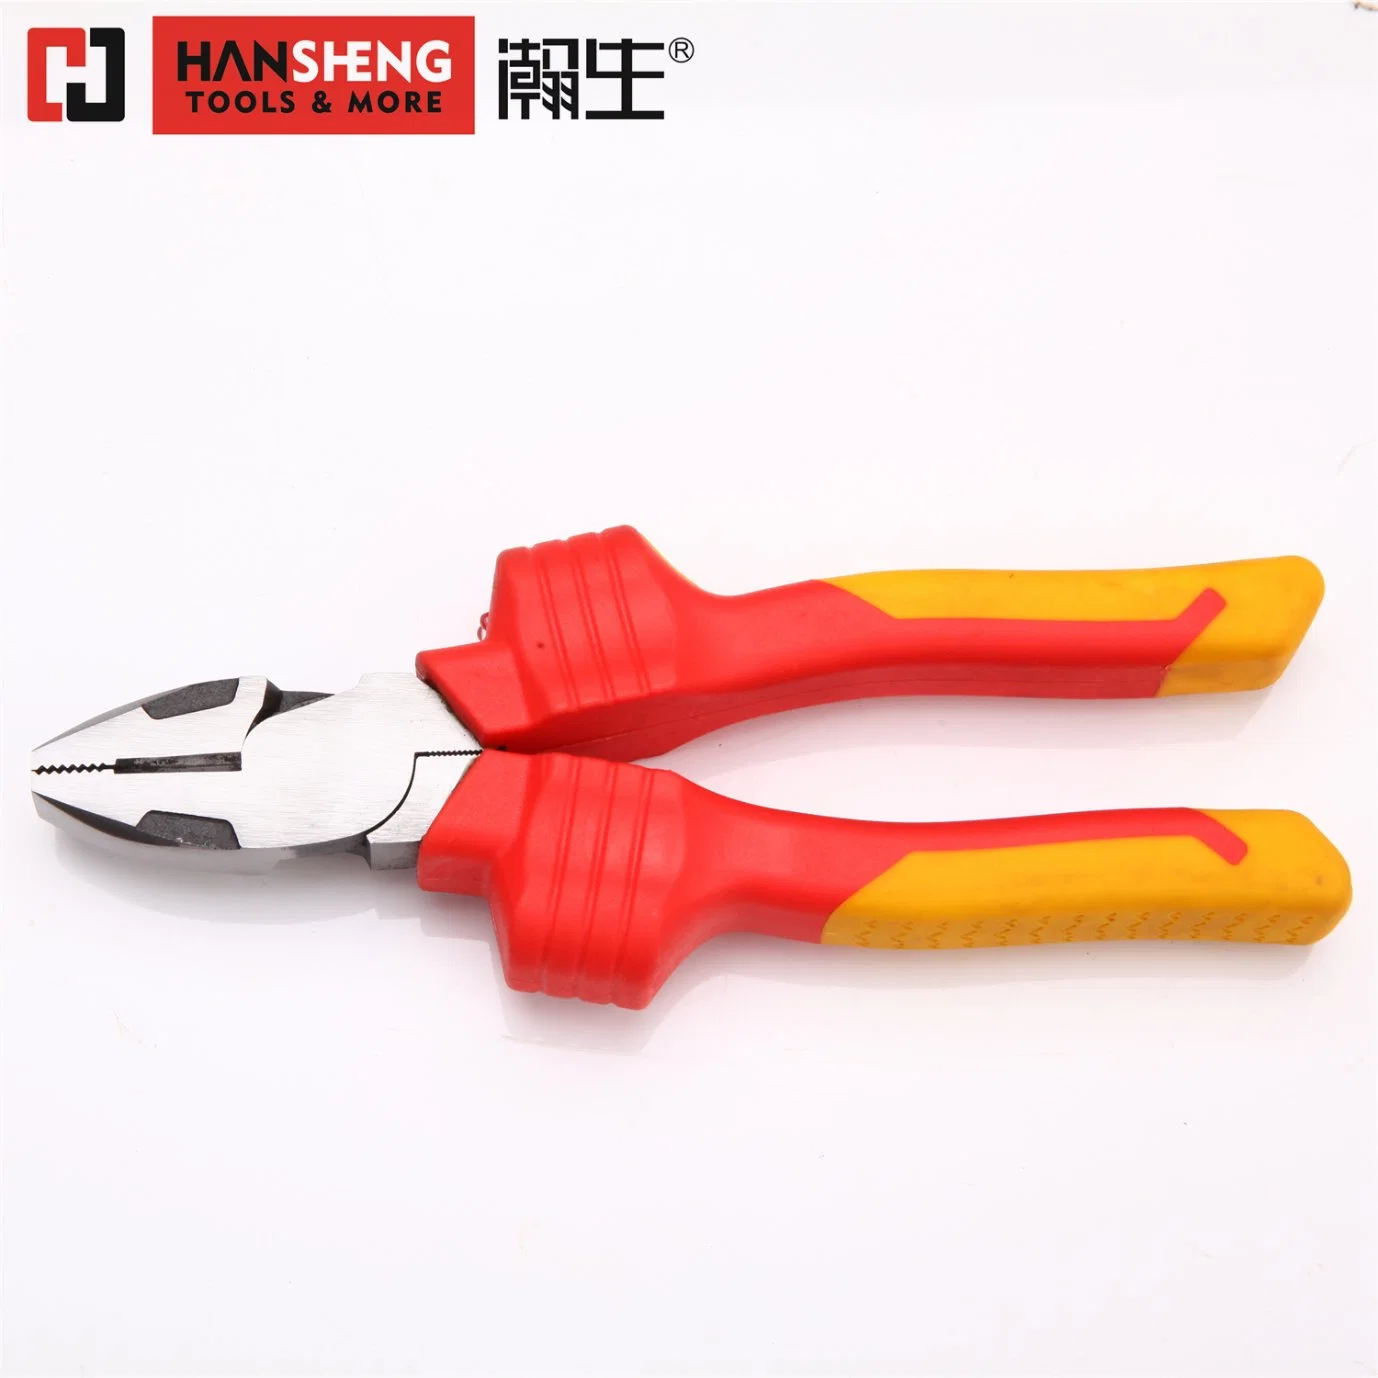 VDE Combination Pliers, Hand Tools, Hardware Tools, Cutting Tools, with 1000V Handle, Professional Hand Tool, Pliers, Insulating Tool